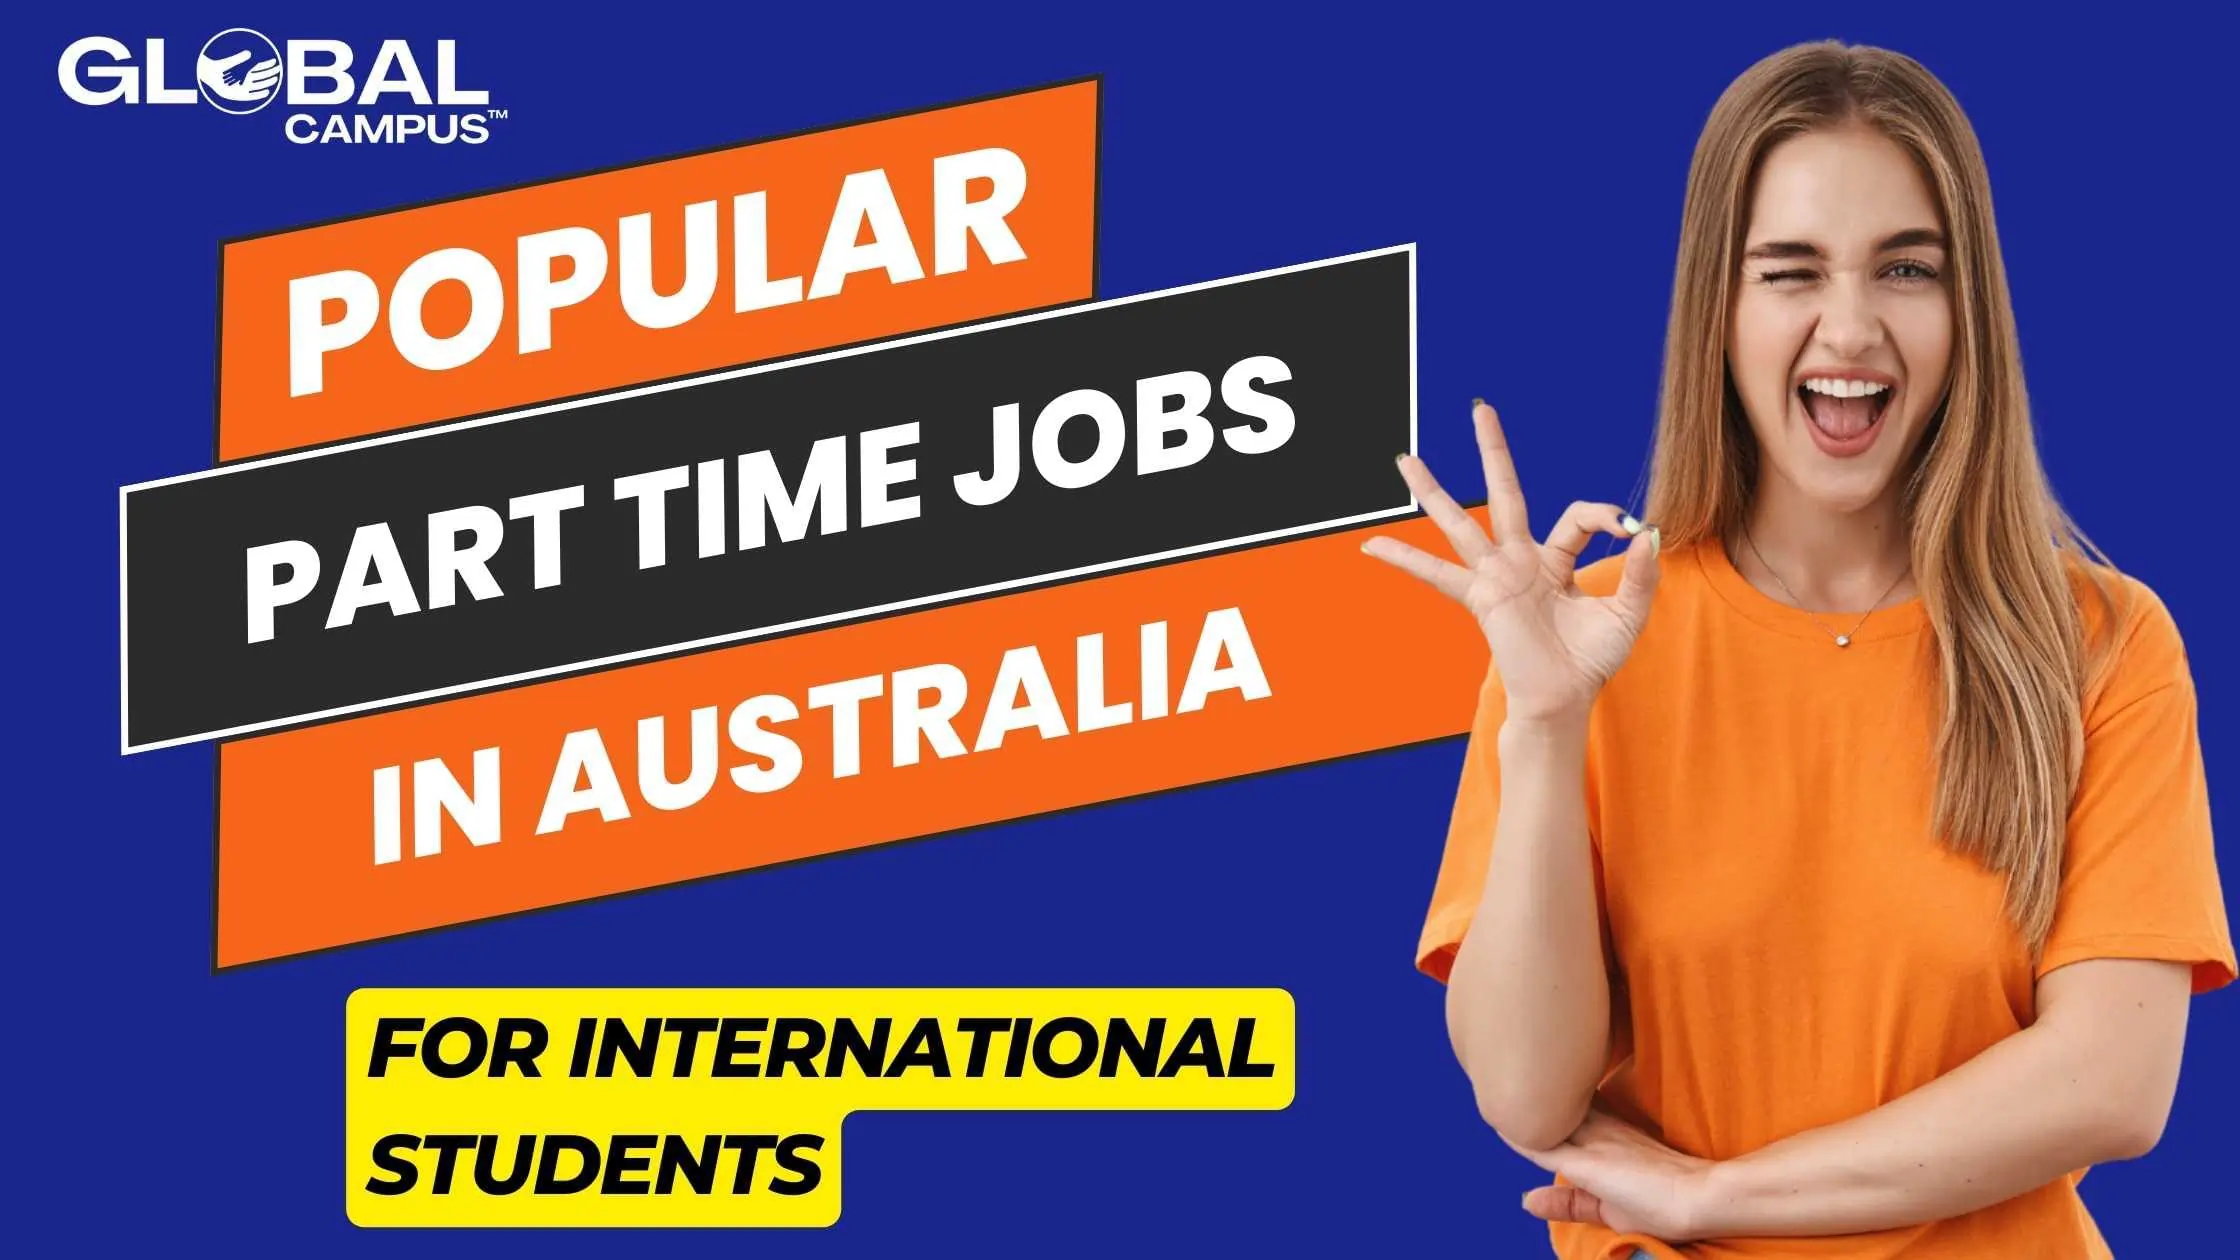 Part-time jobs in Australia for international students